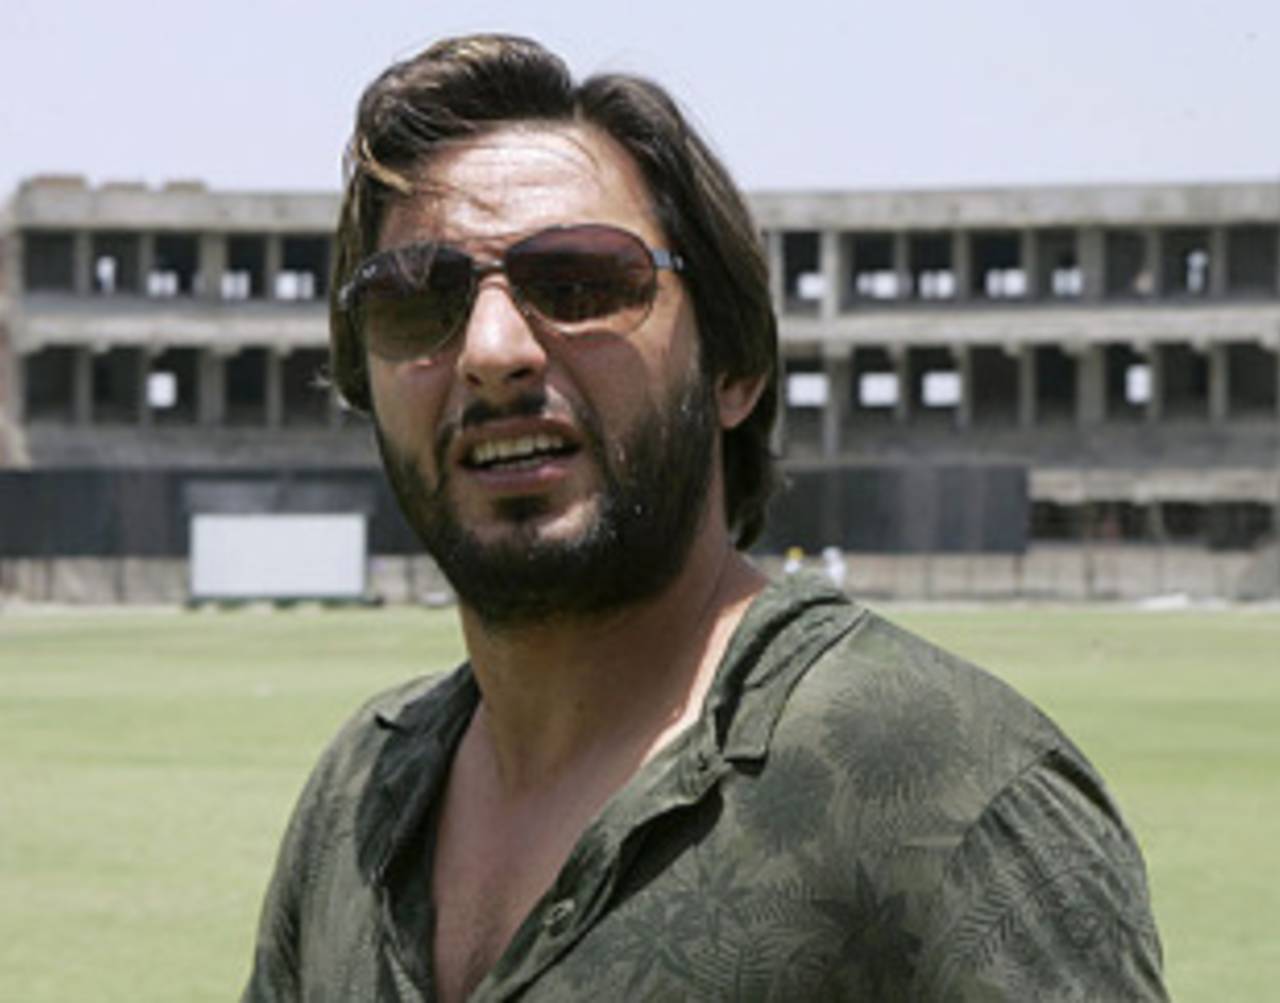 Shahid Afridi at the Gaddafi Stadium on the day of his appointment as captain, Lahore, May 25, 2010